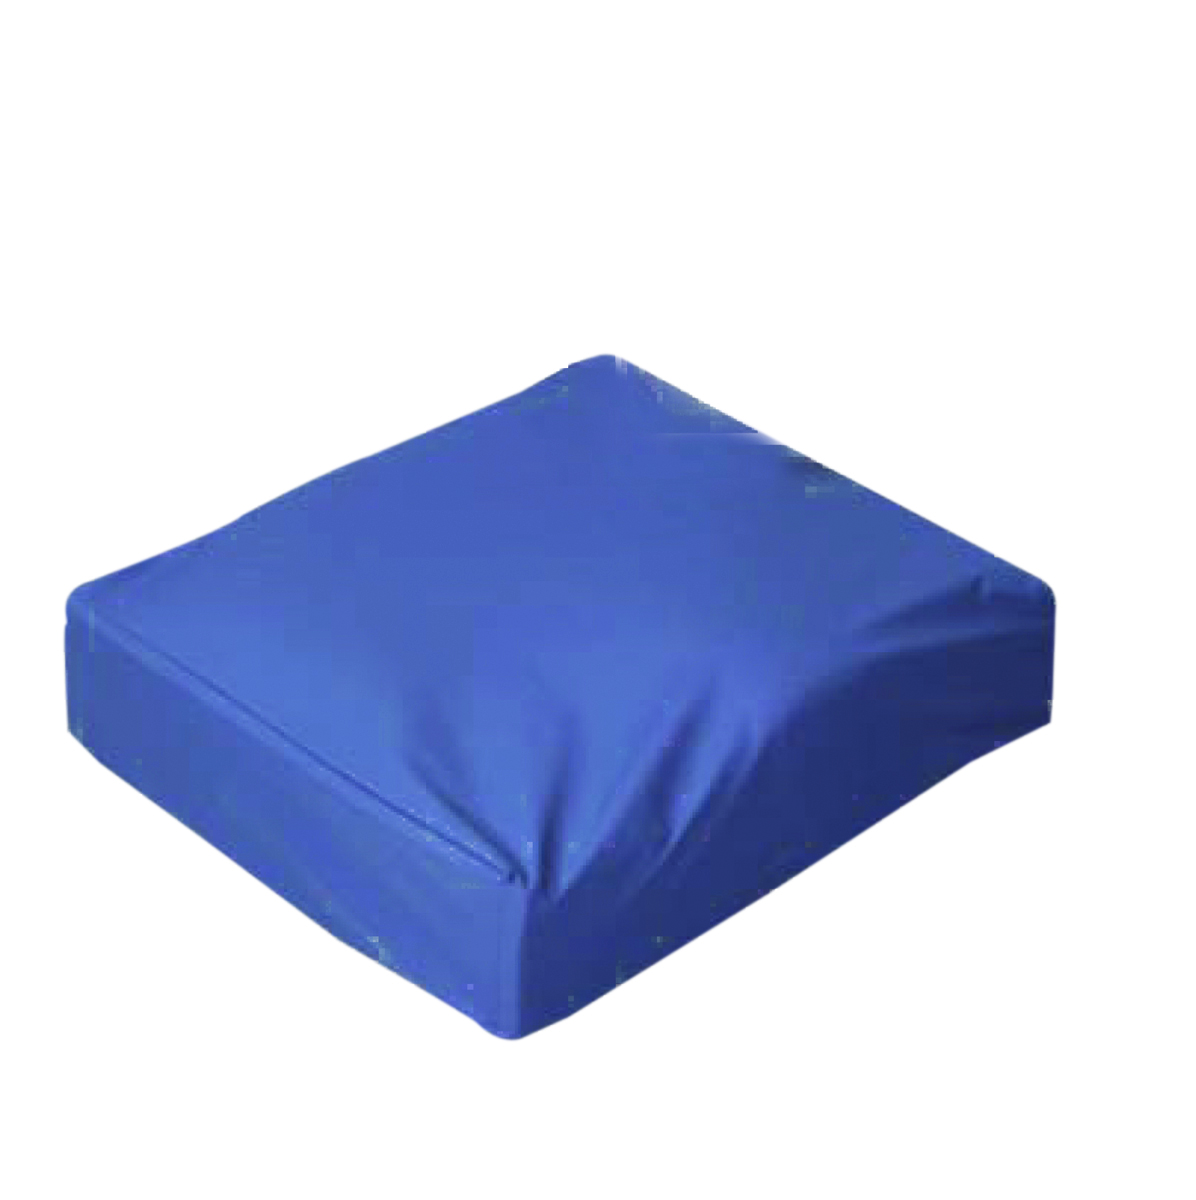 16 X 18 X 2 In. Wheelchair Cushion With Removable Cover - Foam, Navy